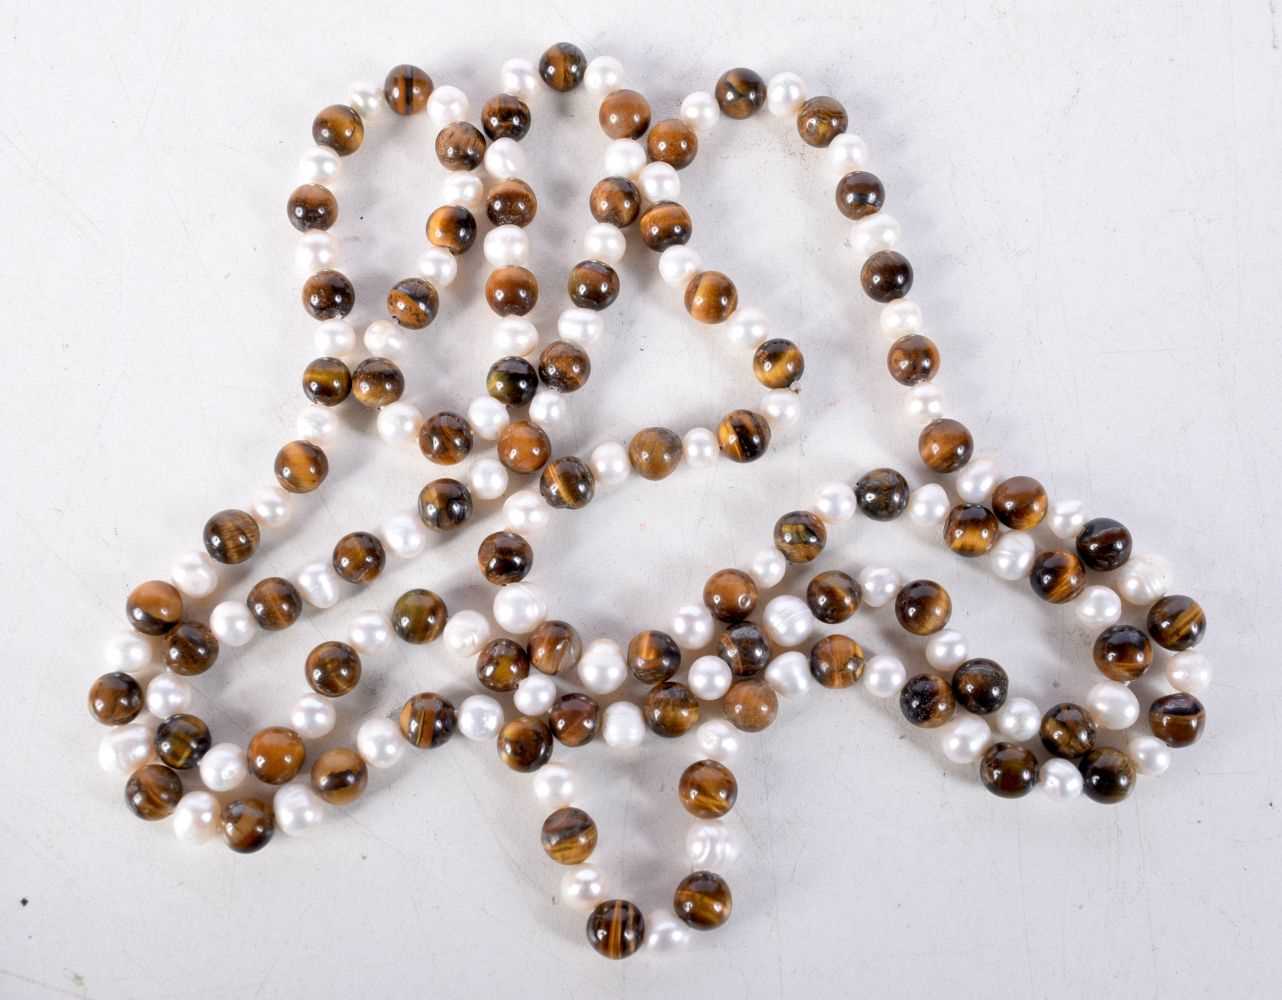 A HARDSTONE BEAD NECKLACE. 124cm long, Bead size 8mm, weight 104g